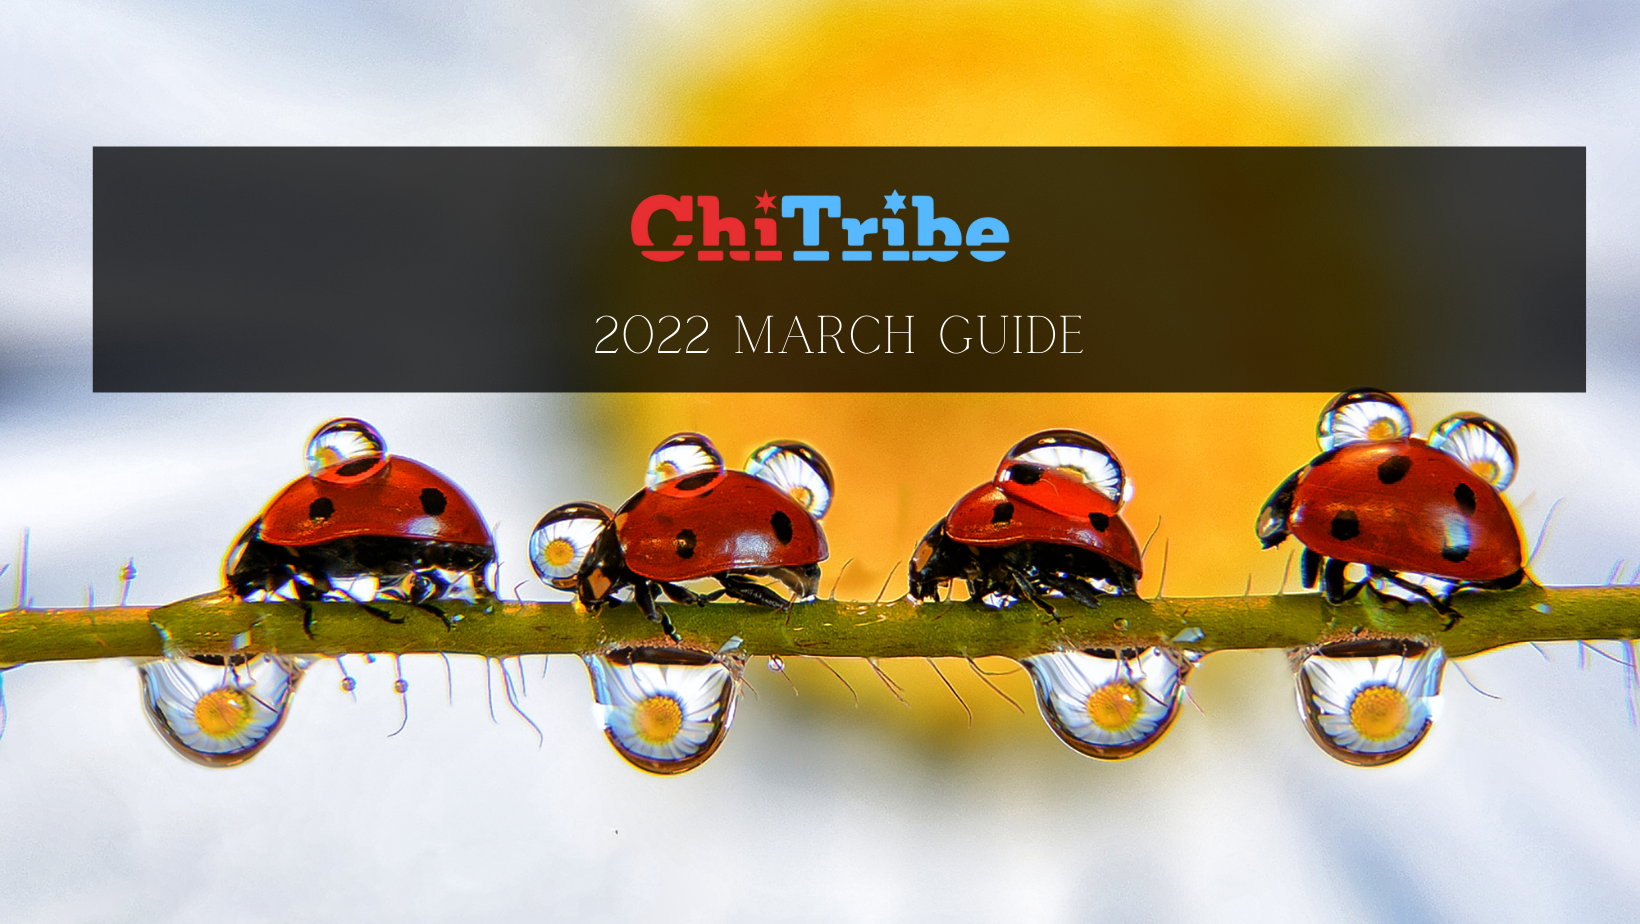 ChiTribe 2022 March guide